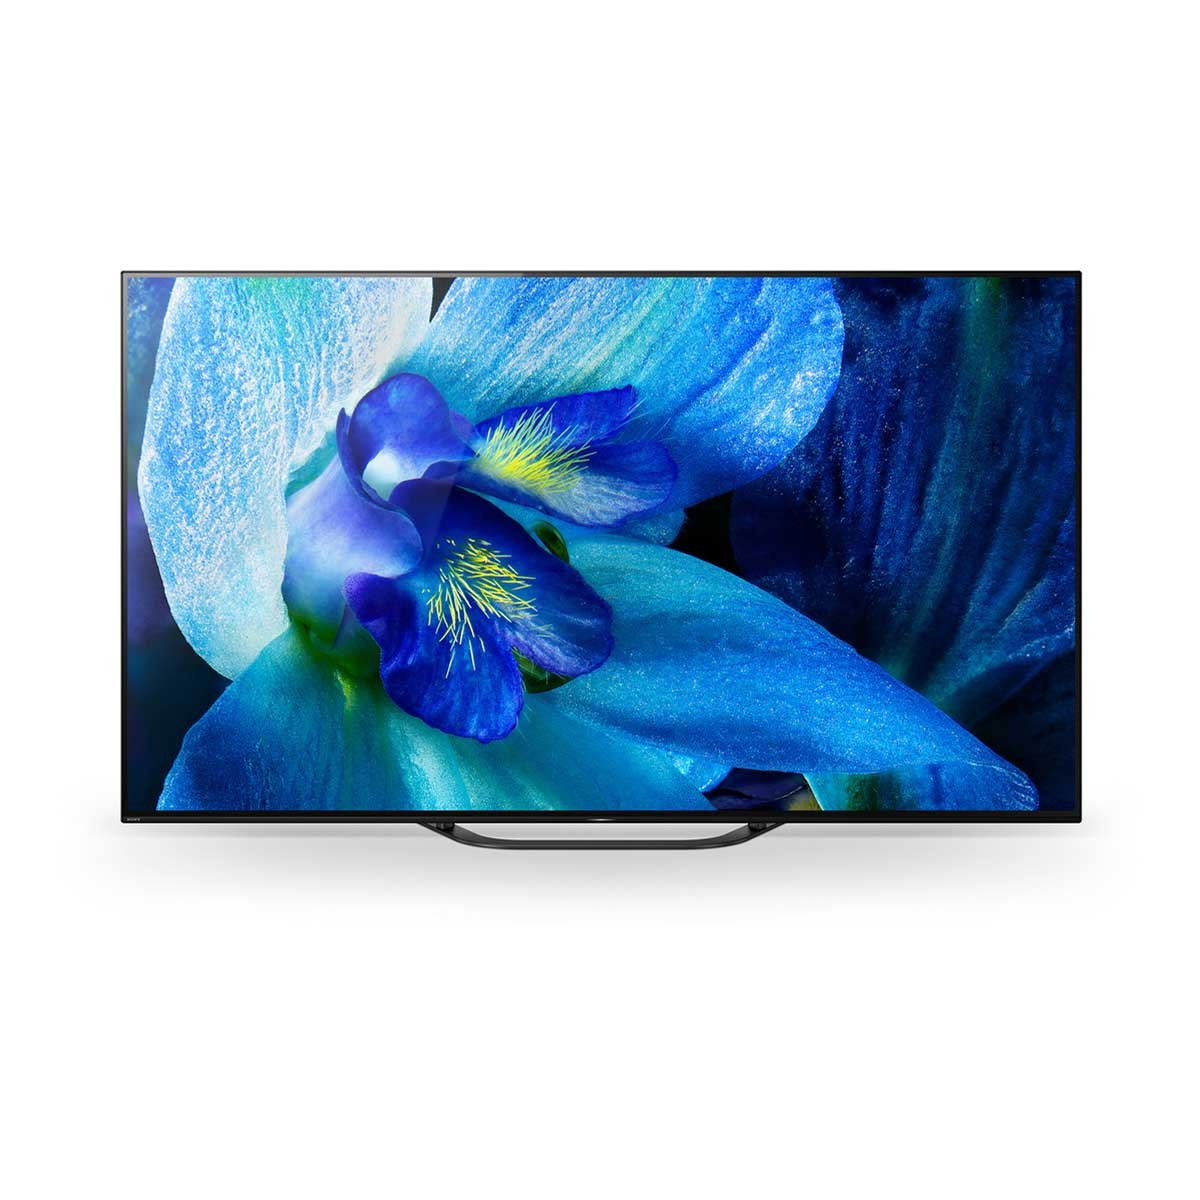 Pantalla 55" Oled 4K Ultra Hd Android Tv Serie A8G Sony